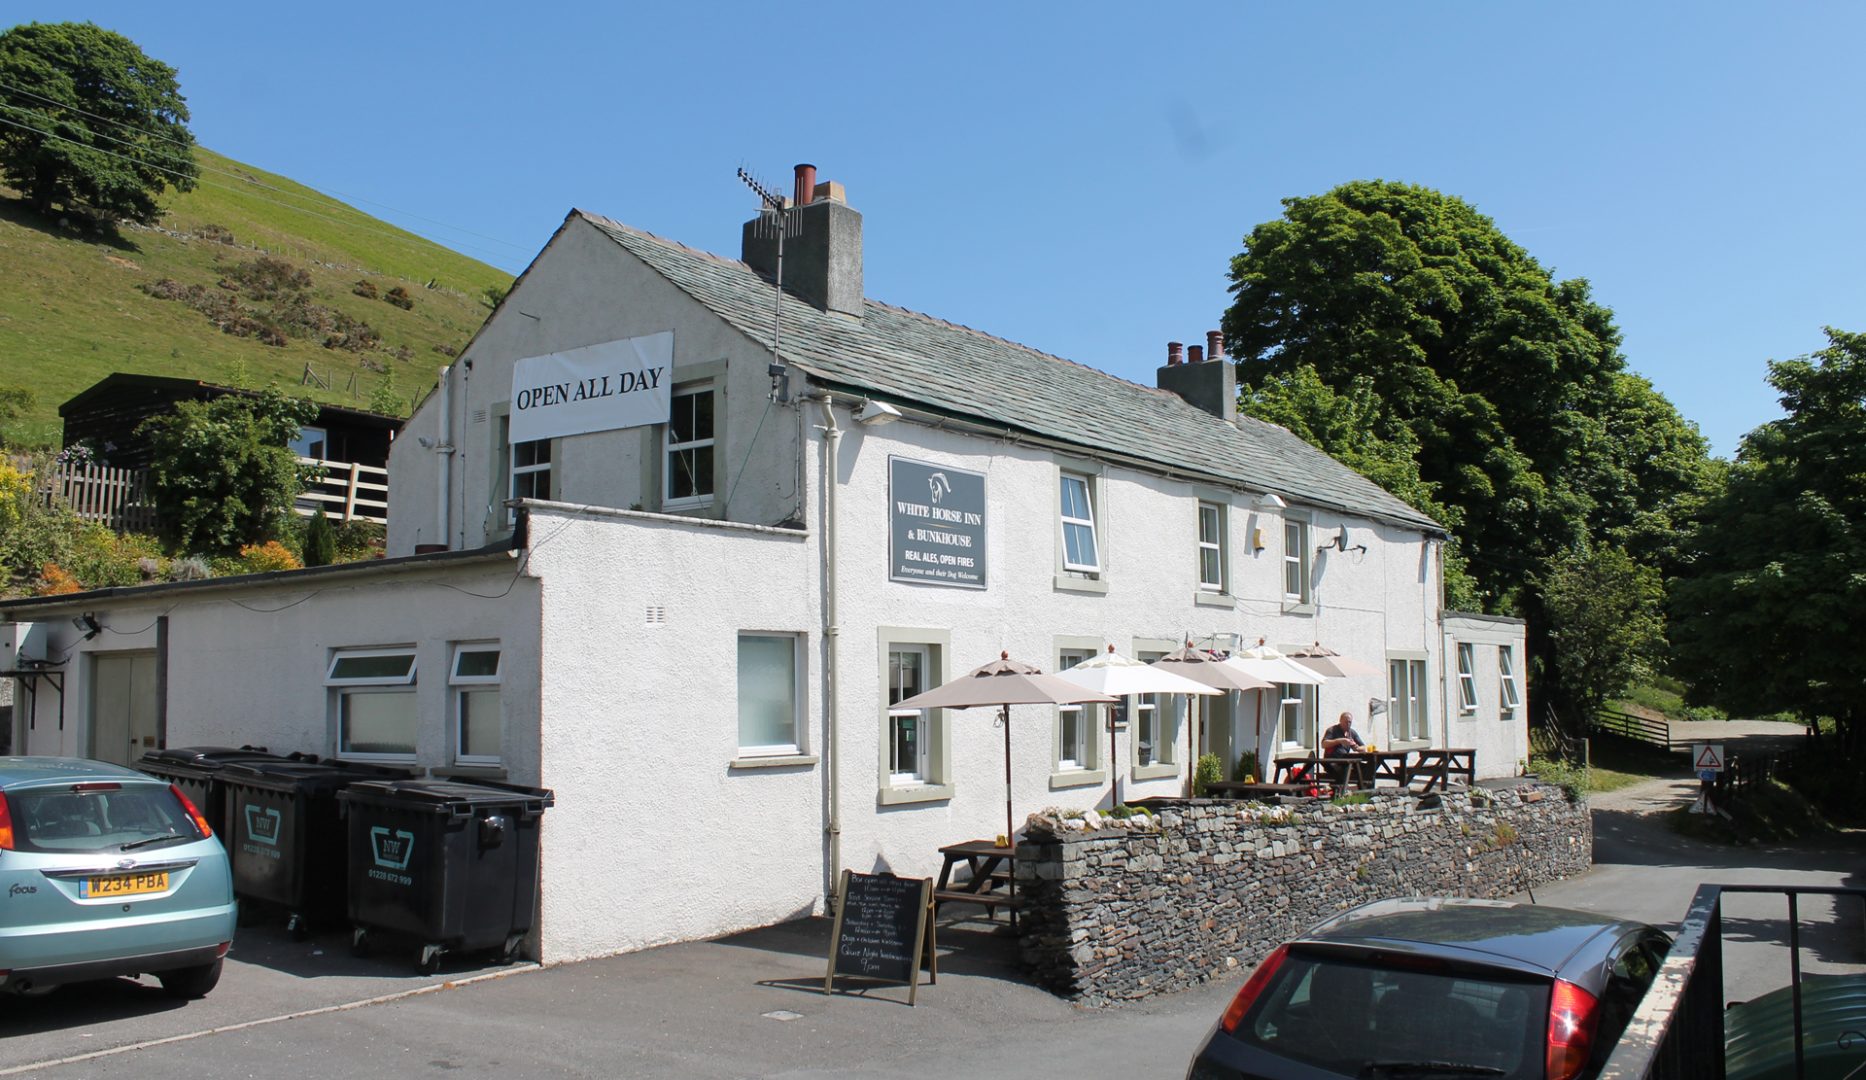 The White Horse Inn and Bunkhouse